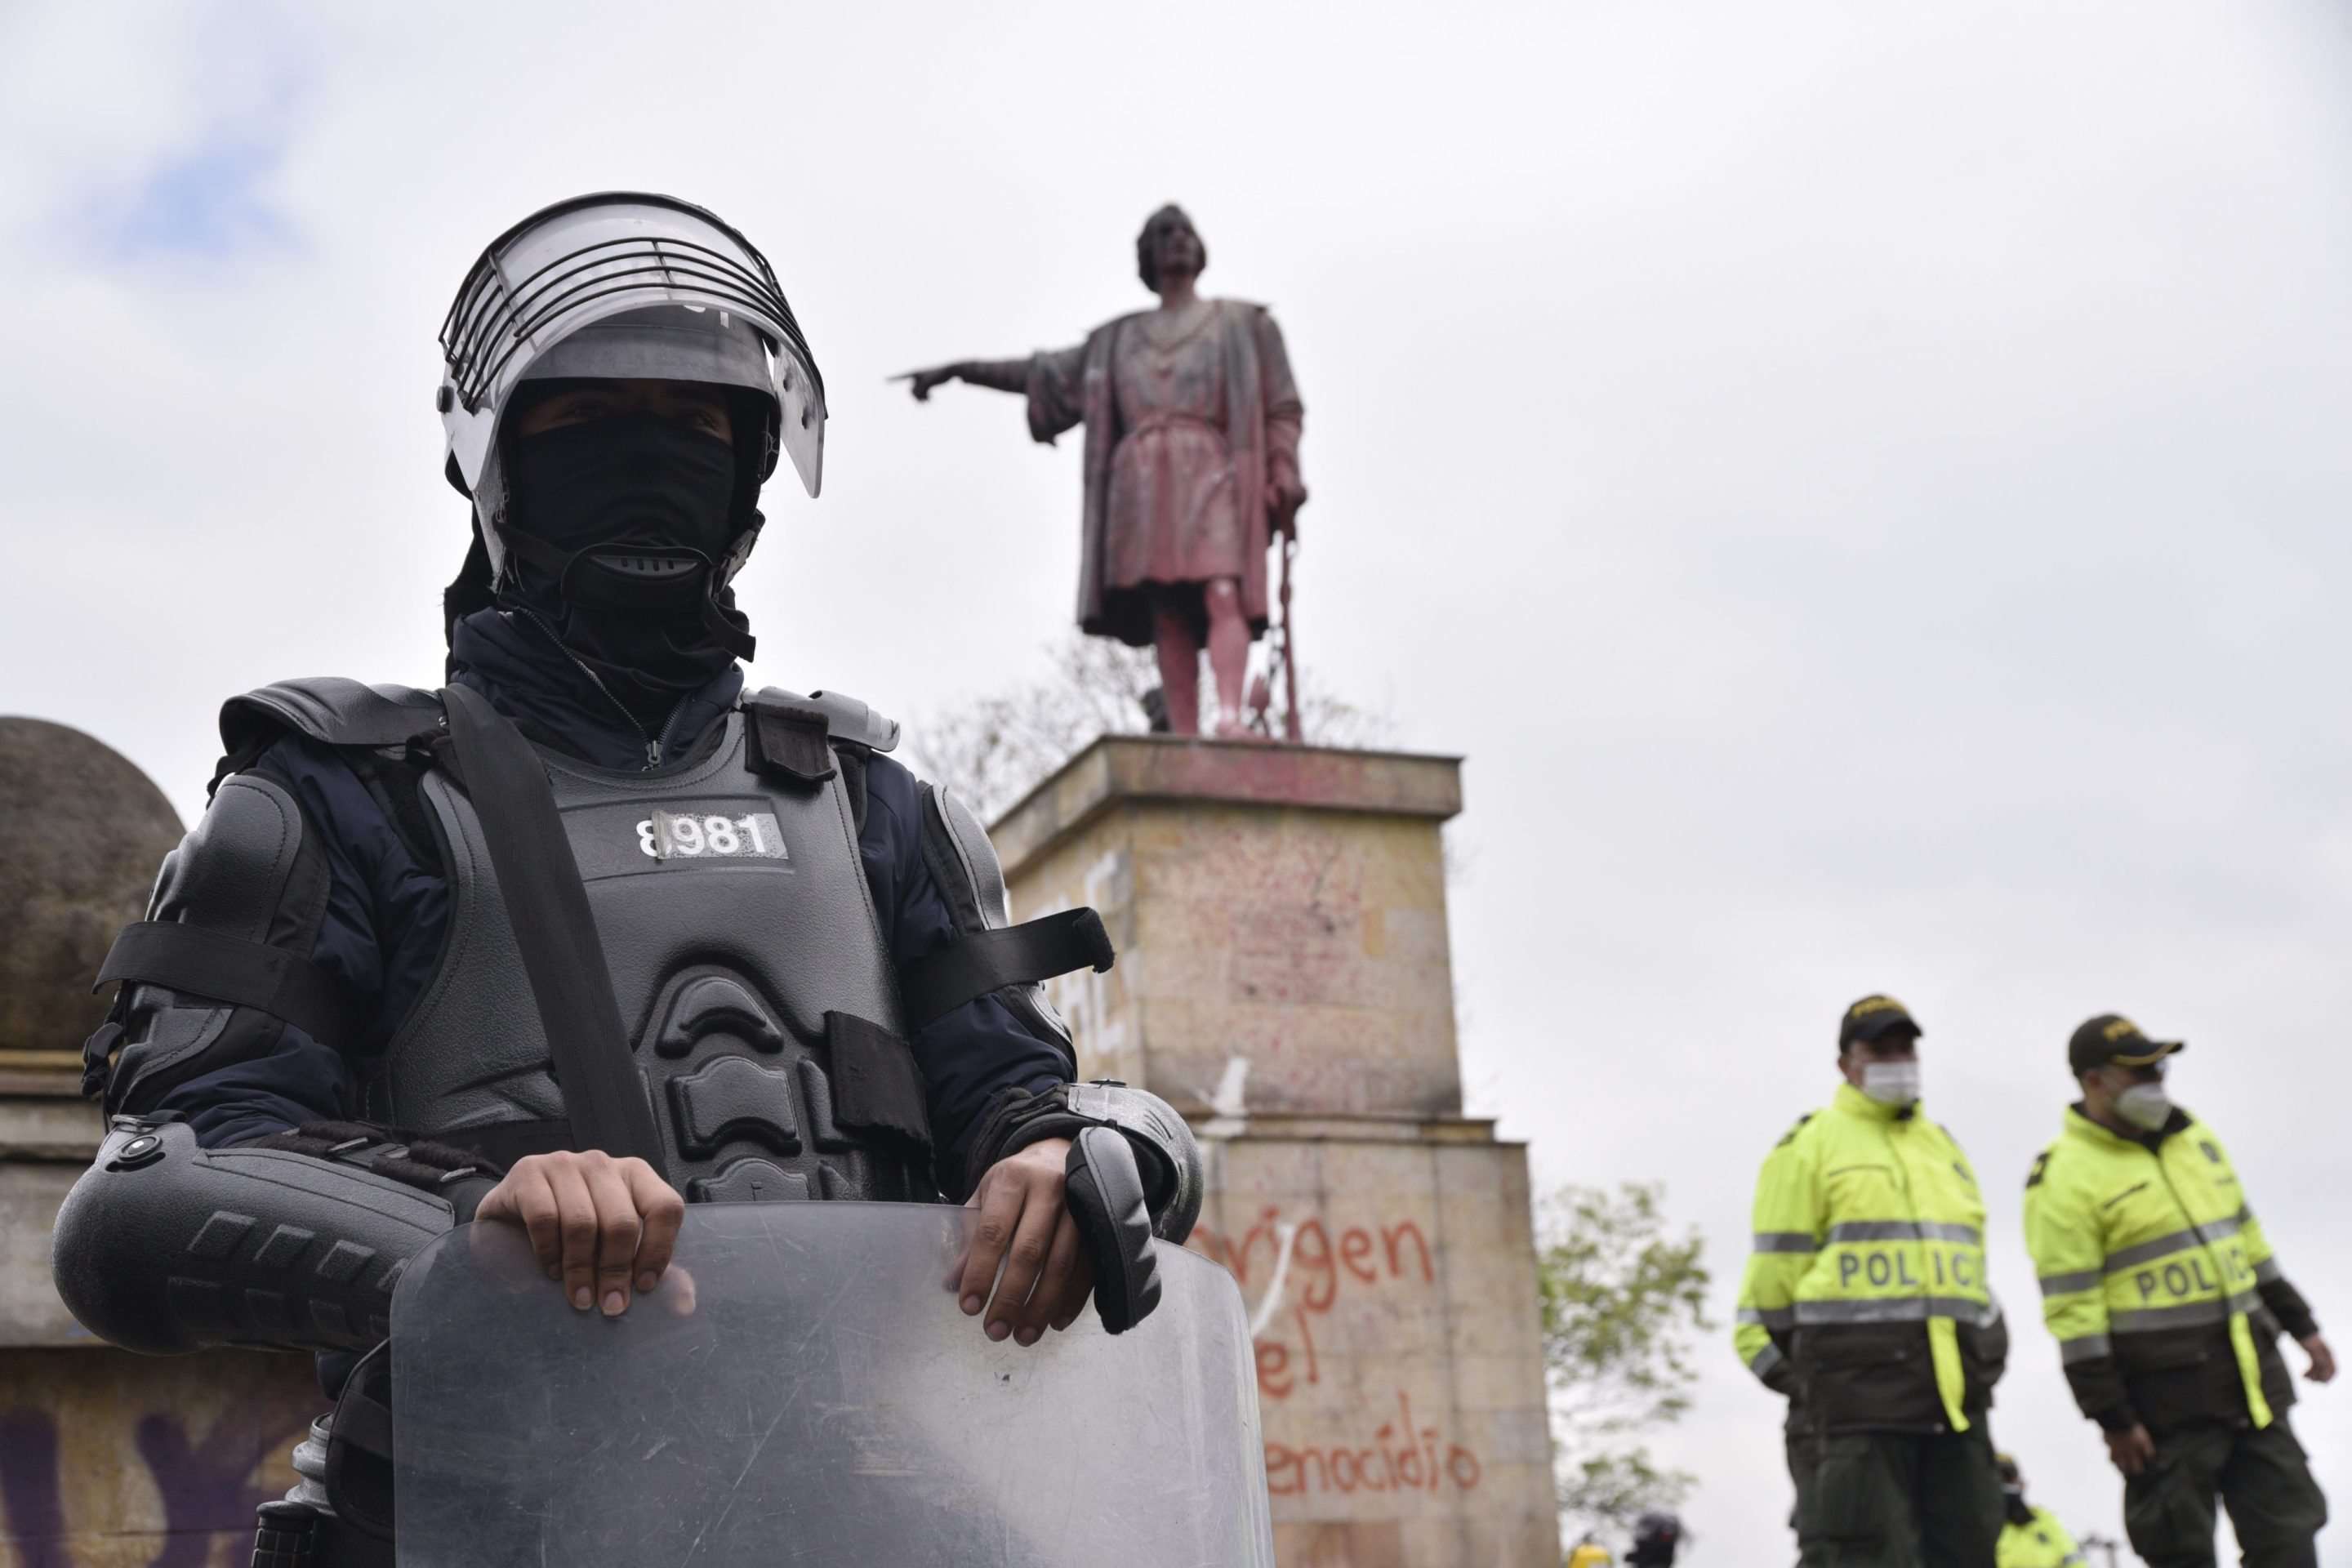 A statue of Christopher Columbus in Bogota, Colombia, defaced by protestors, is protected by armed police.